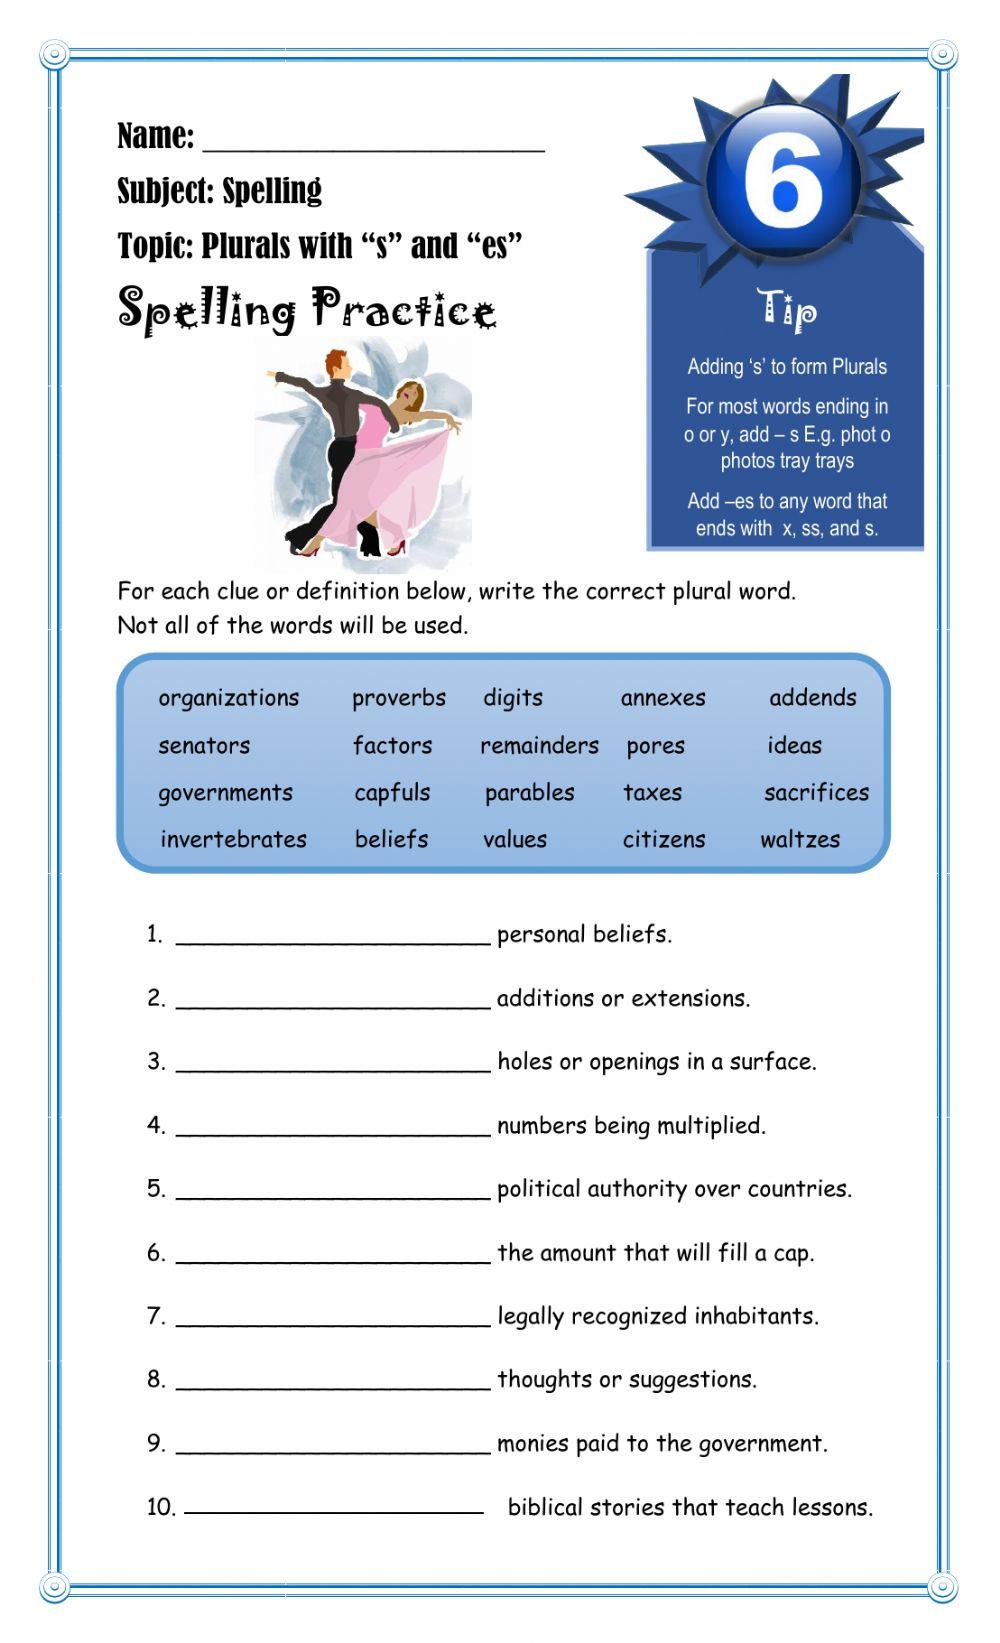 Spelling Plurals with -s- and -es-